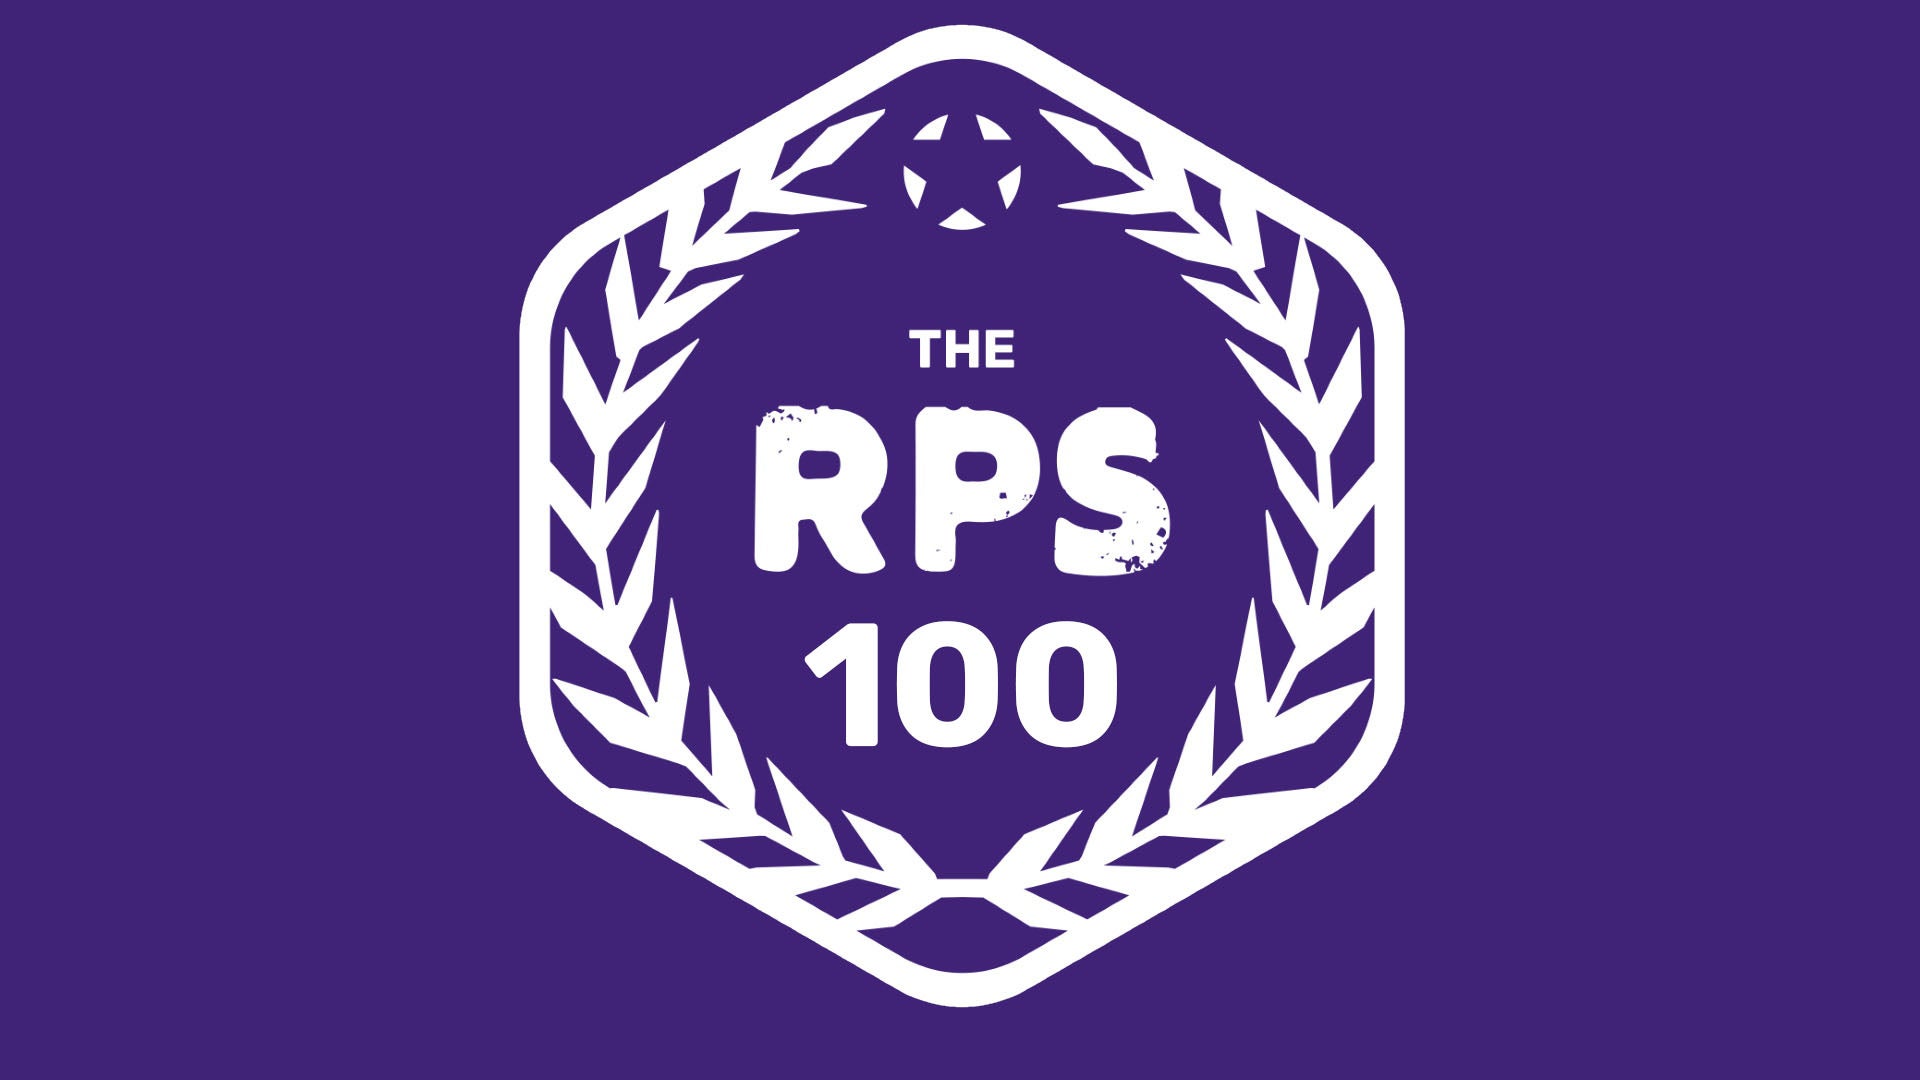 The RPS 100